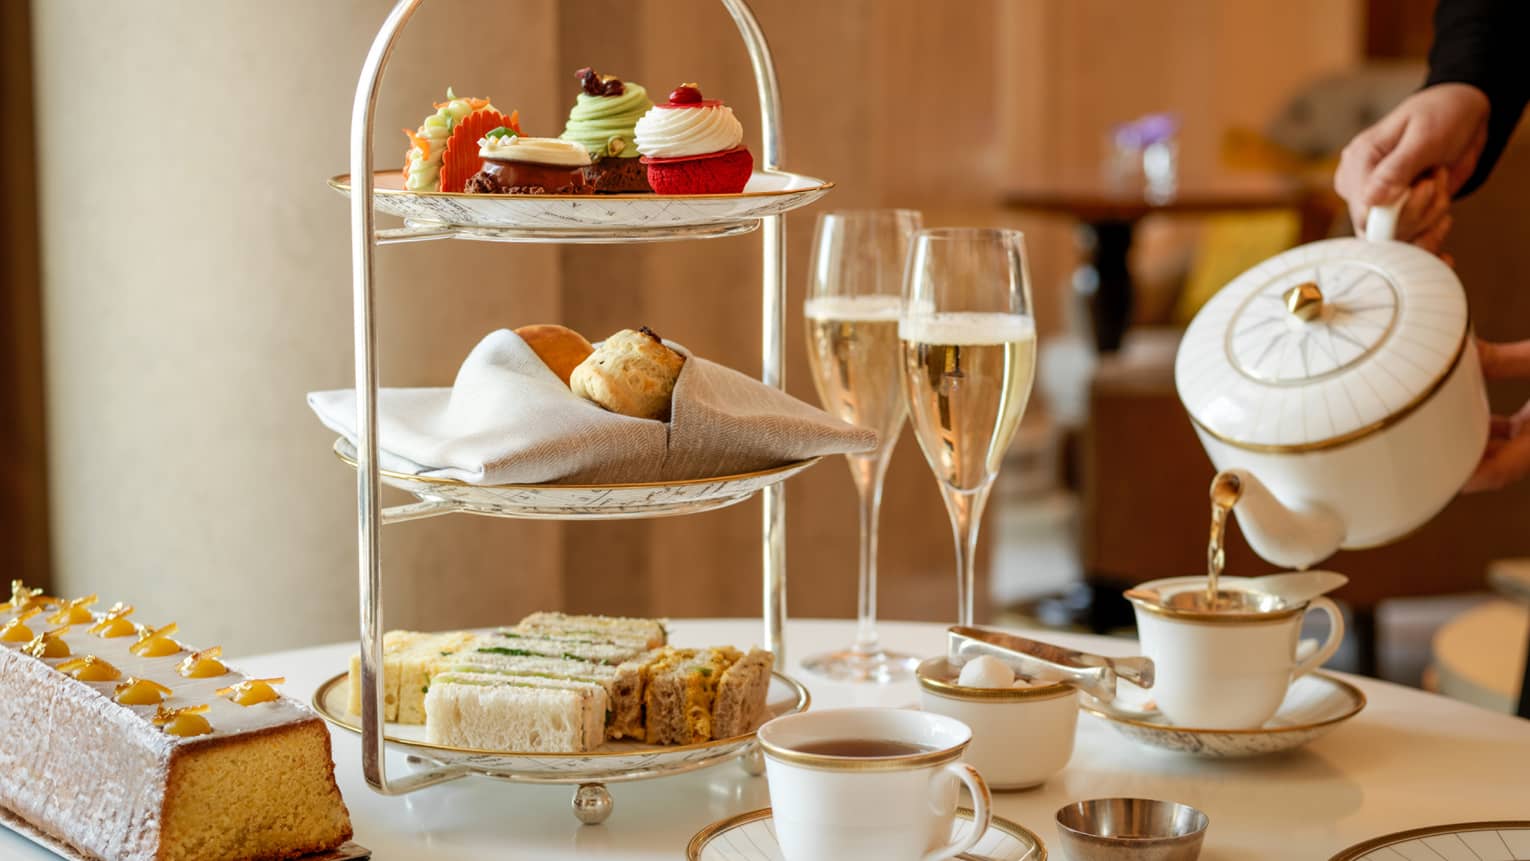 Afternoon tea with pastries and champagne in Rotunda Lounge